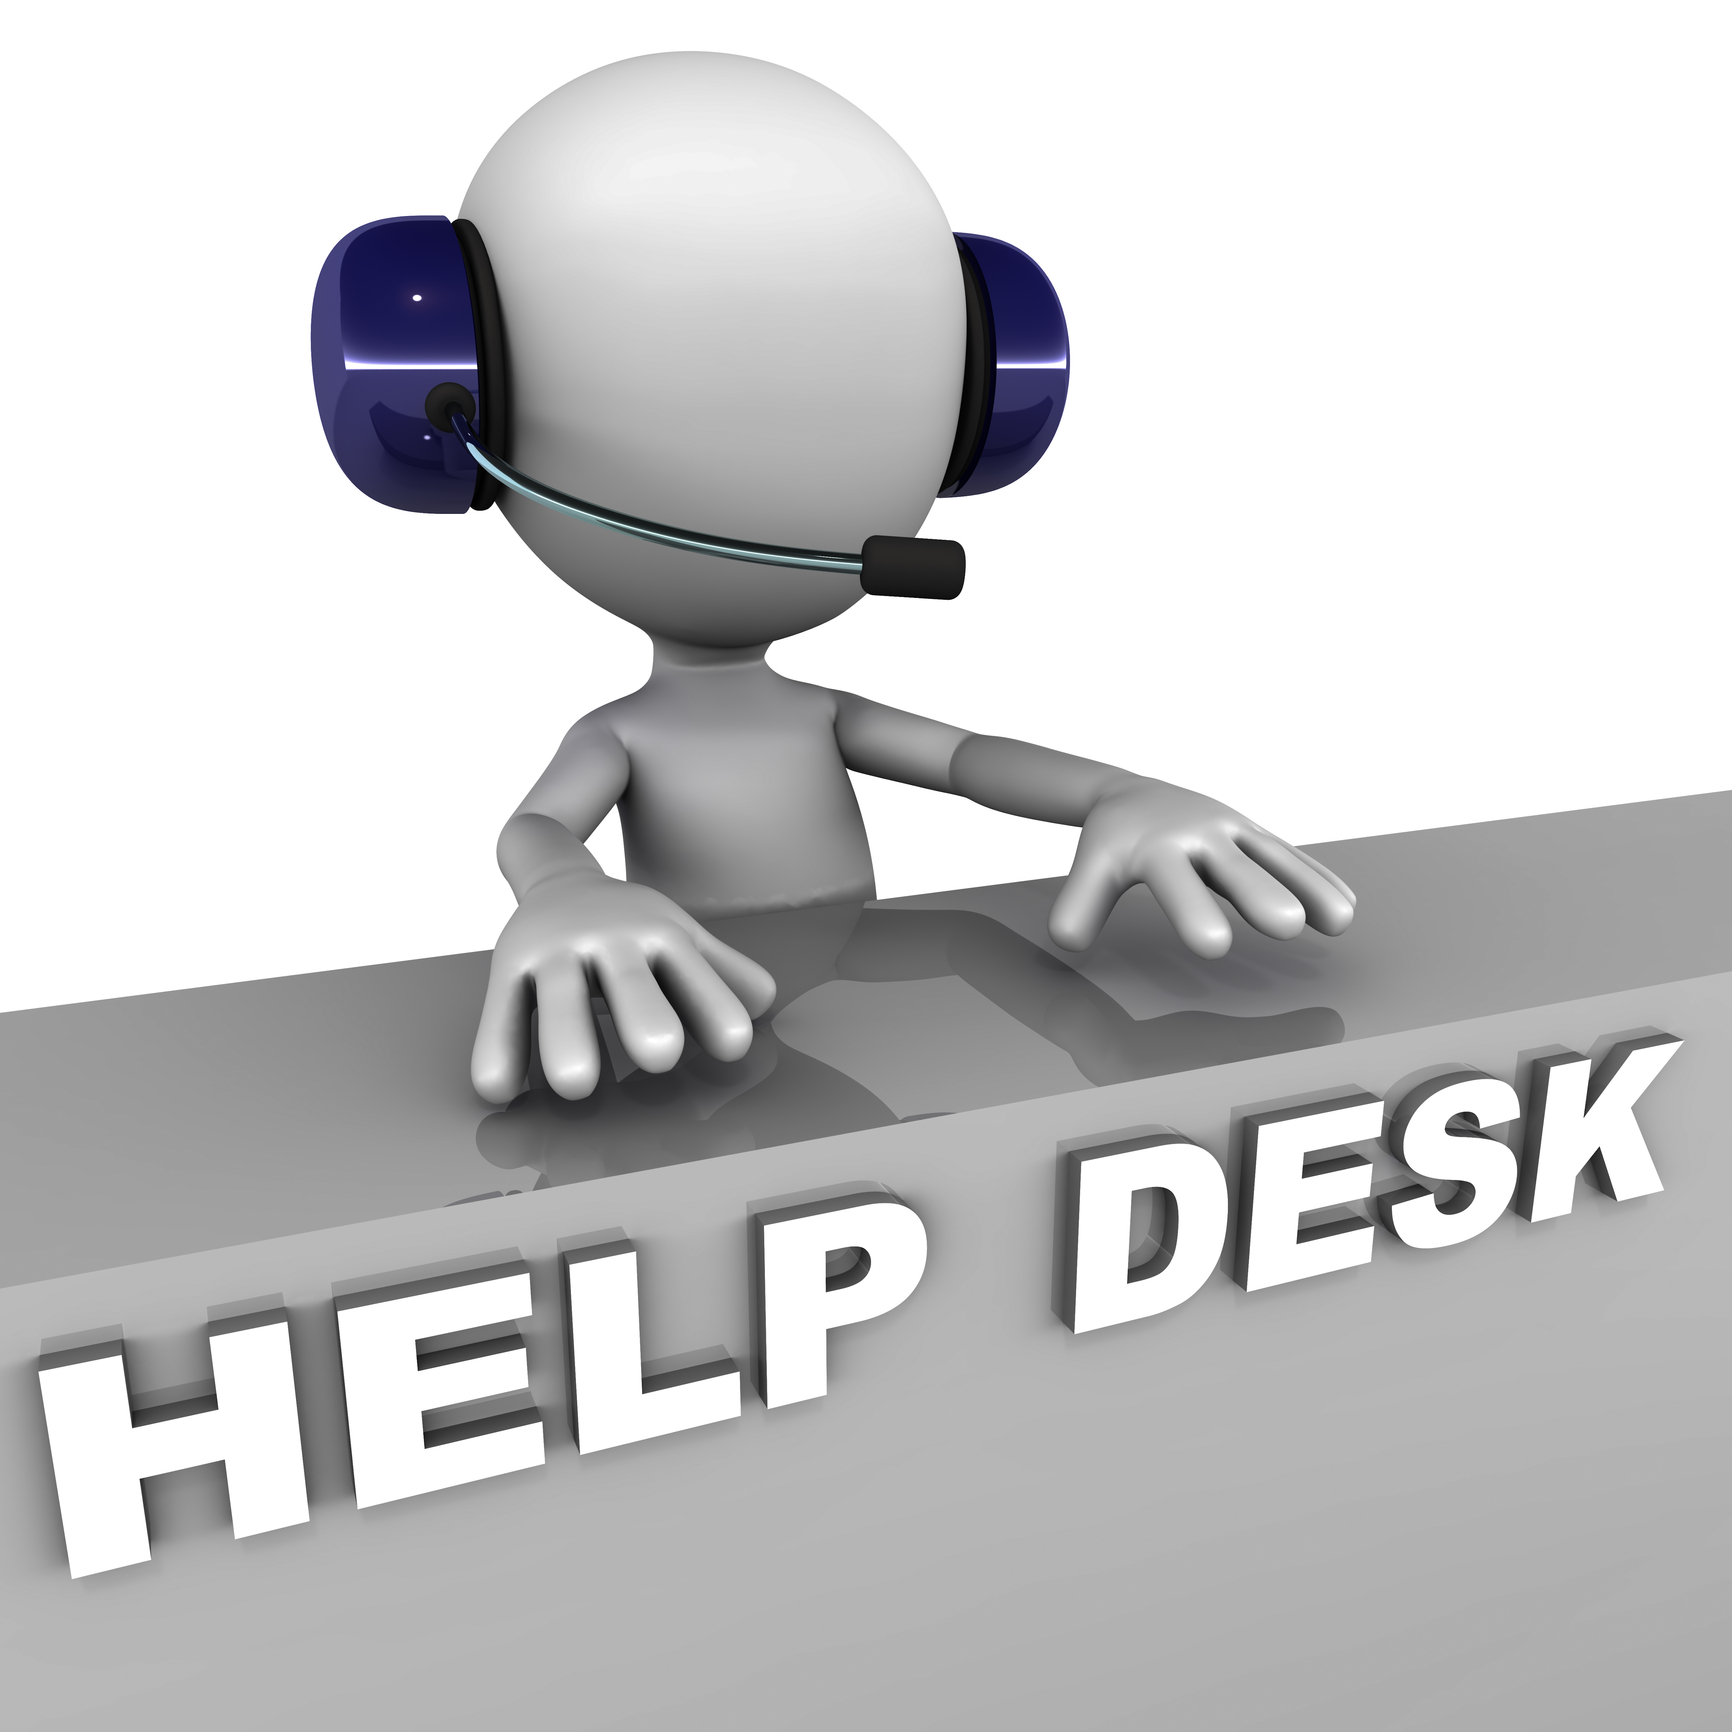 http://www.dreamstime.com/royalty-free-stock-photos-help-desk-managed-little-white-man-headset-white-background-concept-support-customer-care-image31324988